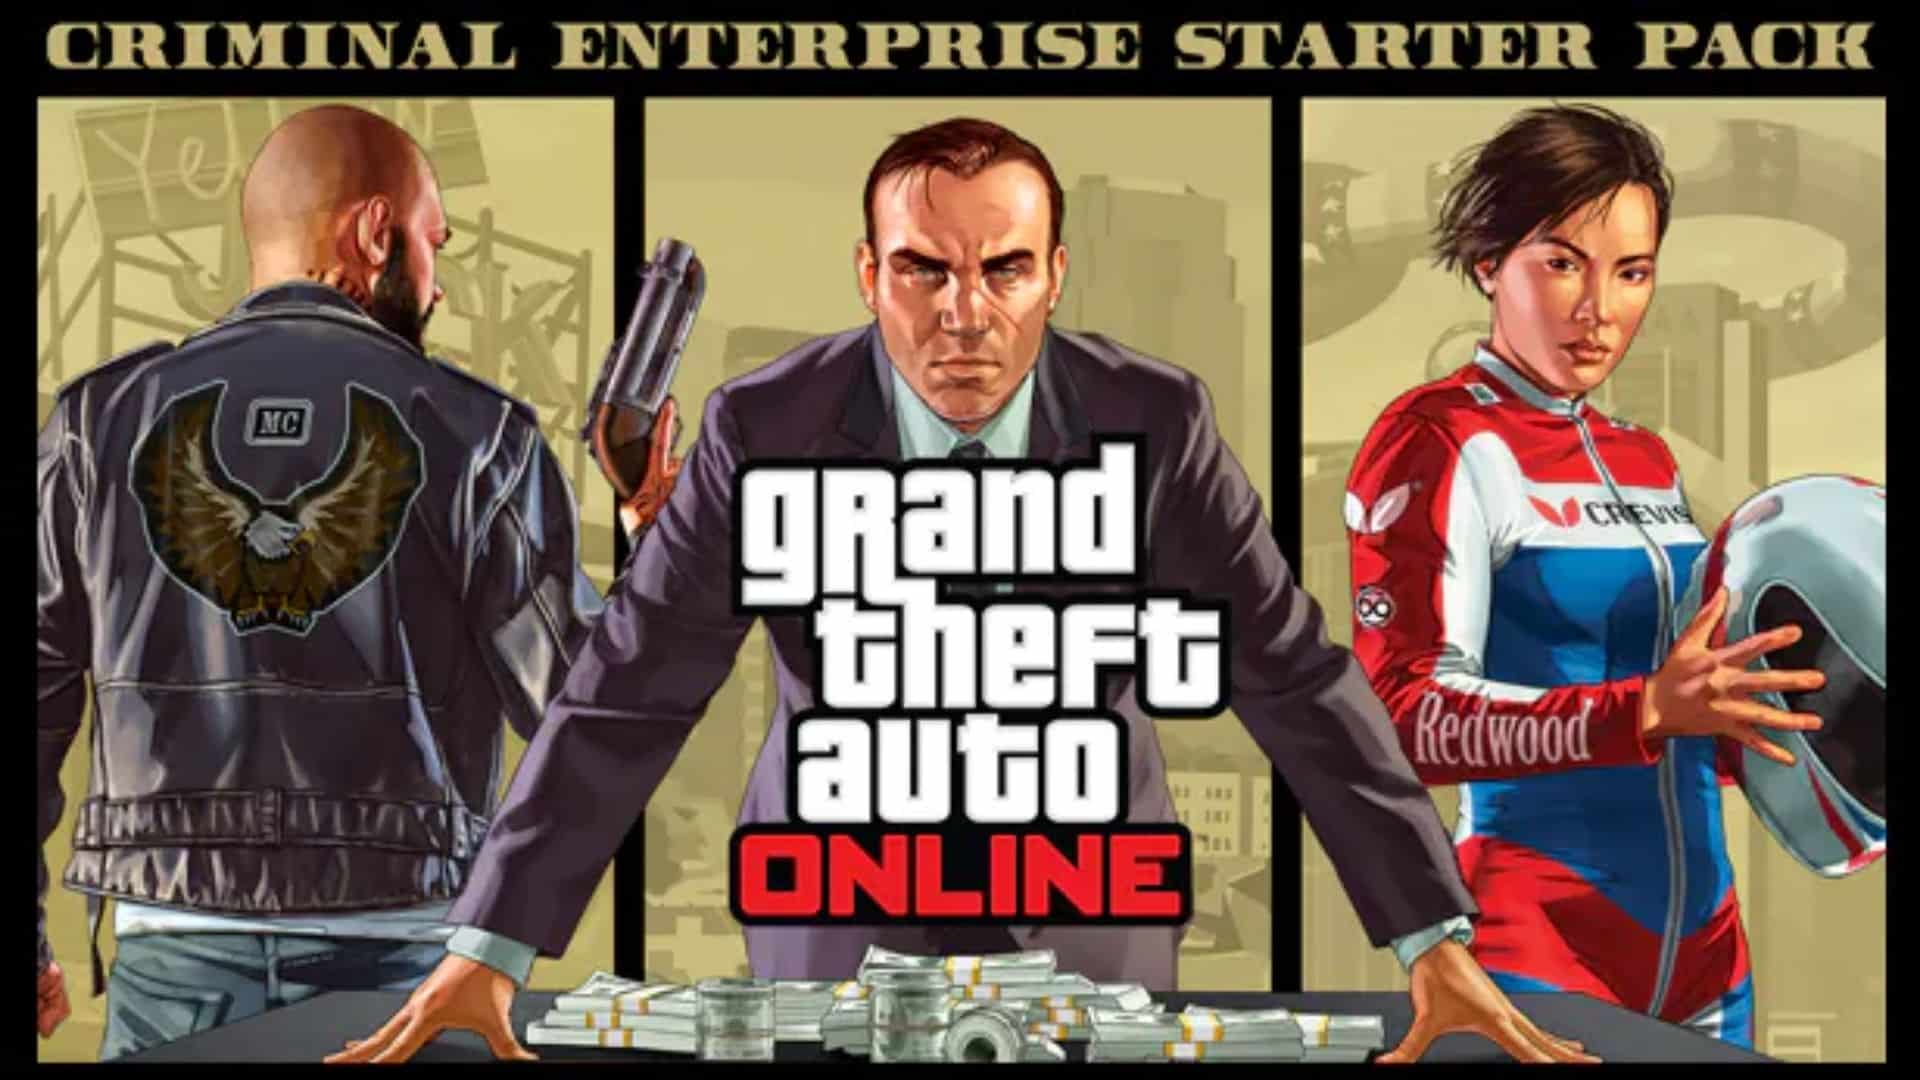 Do you need PlayStation Plus to play Grand Theft Auto Online? - GTA BOOM